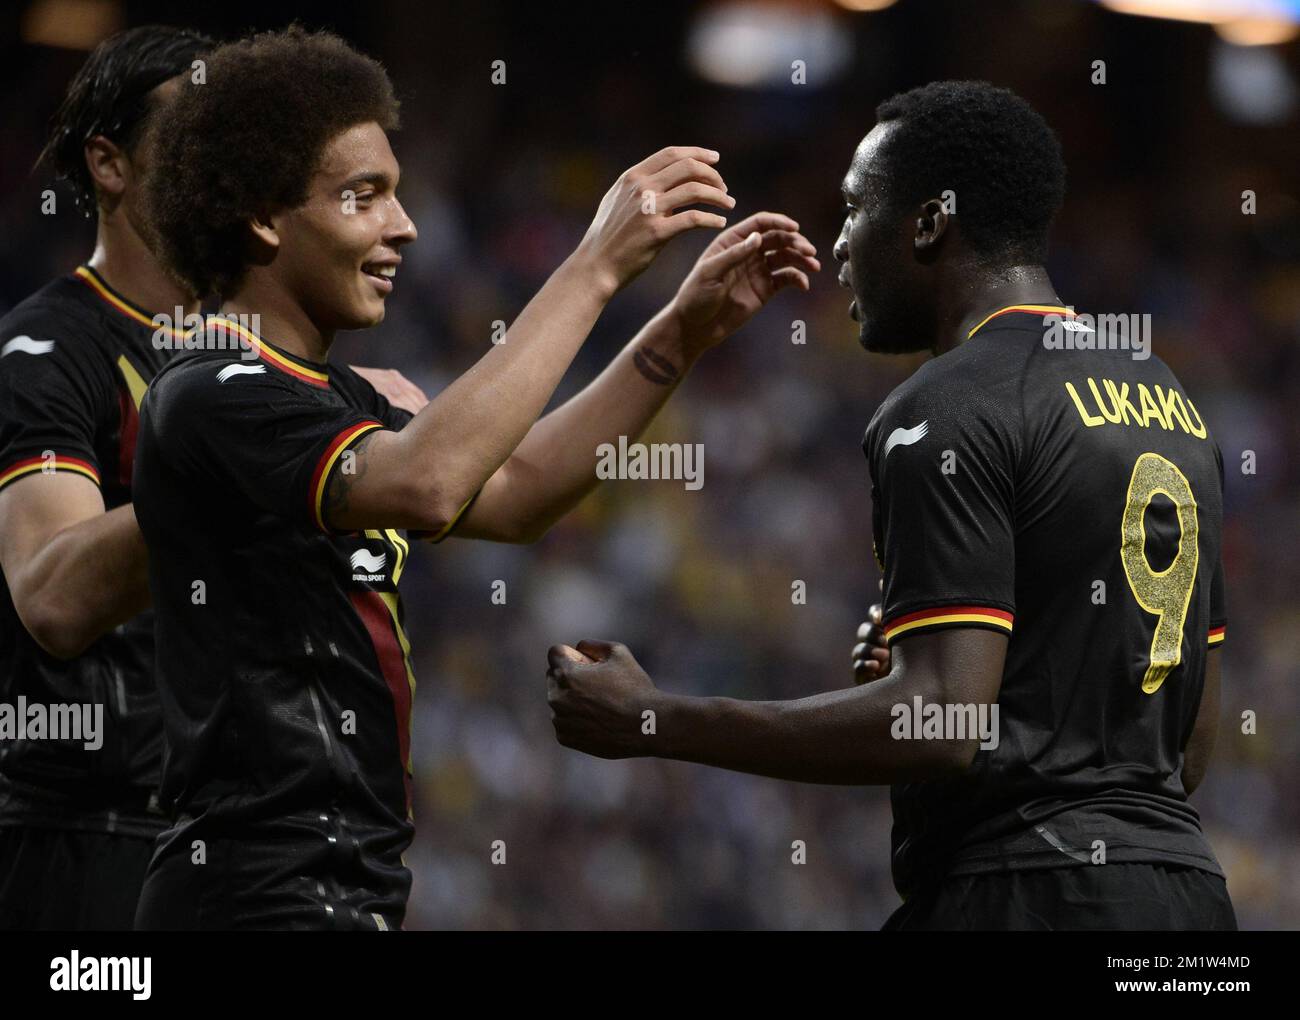 Belgium's Romelu Lukaku celebrates with Axel Witsel after scoring the 0-1 goal at a friendly game between Belgian national soccer team Red Devils and the Swedish national soccer team in the Friends Arena, Sunday 01 June 2014, in Solna, Sweden. The Belgian Red Devils are preparing for the Brazil 2014 World Cup during a training camp in Sweden.  Stock Photo